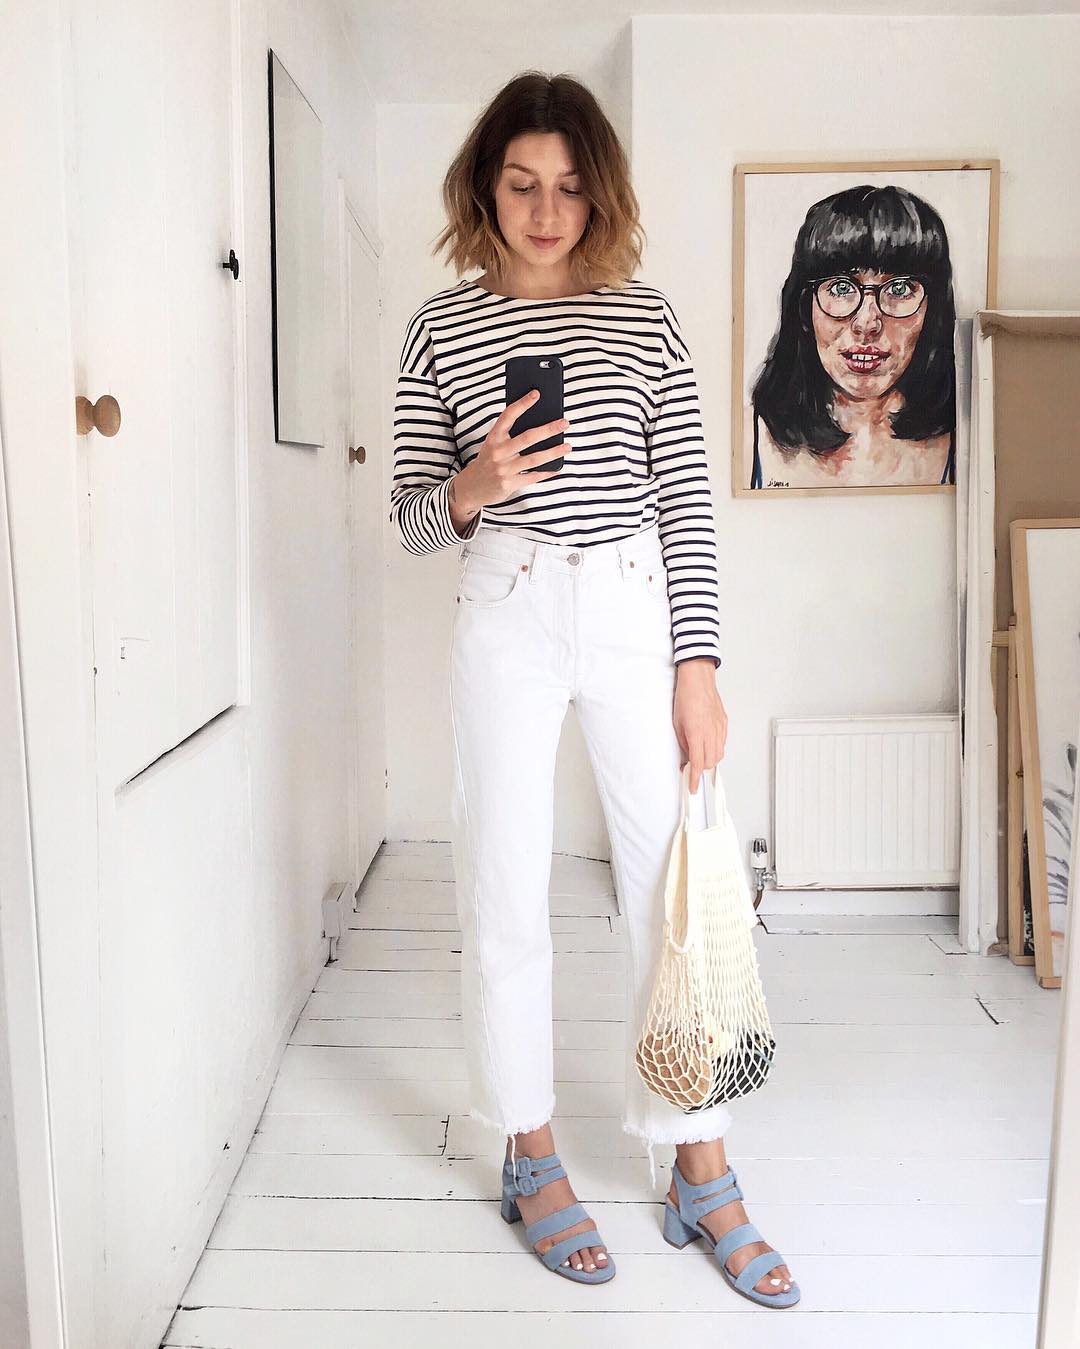 ow to Wear a Striped T-Shirt for Spring — Instagram Outfit Idea with raw-hem white jeans, mesh tote, blue suede sandals